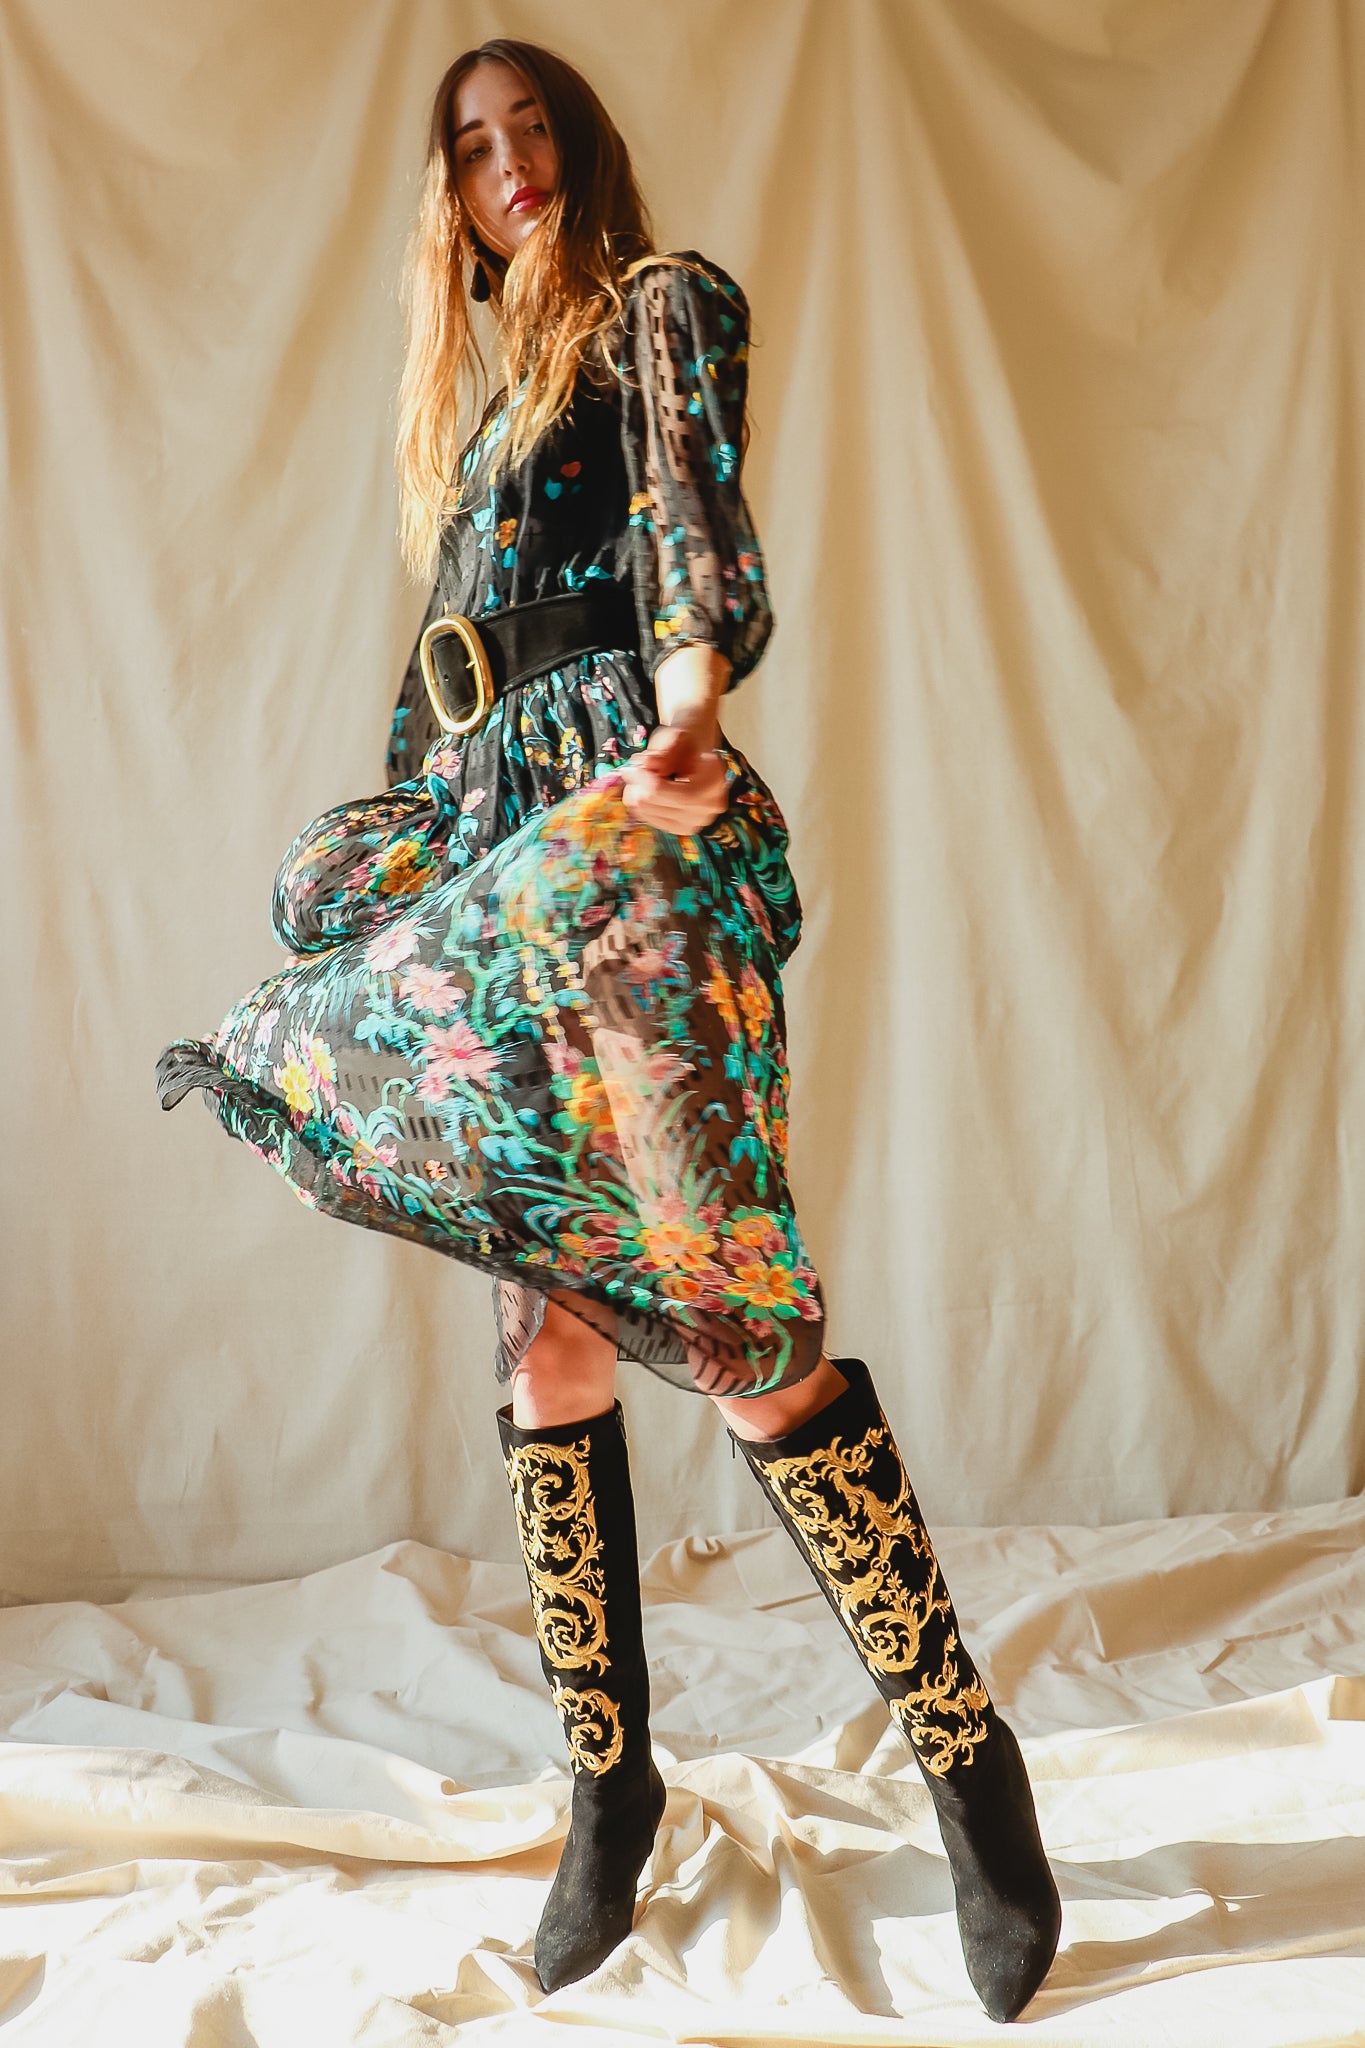 Recess Vintage Consignment LA Girl in Vintage Sheer Silk Floral Dress & Embroidered Boots